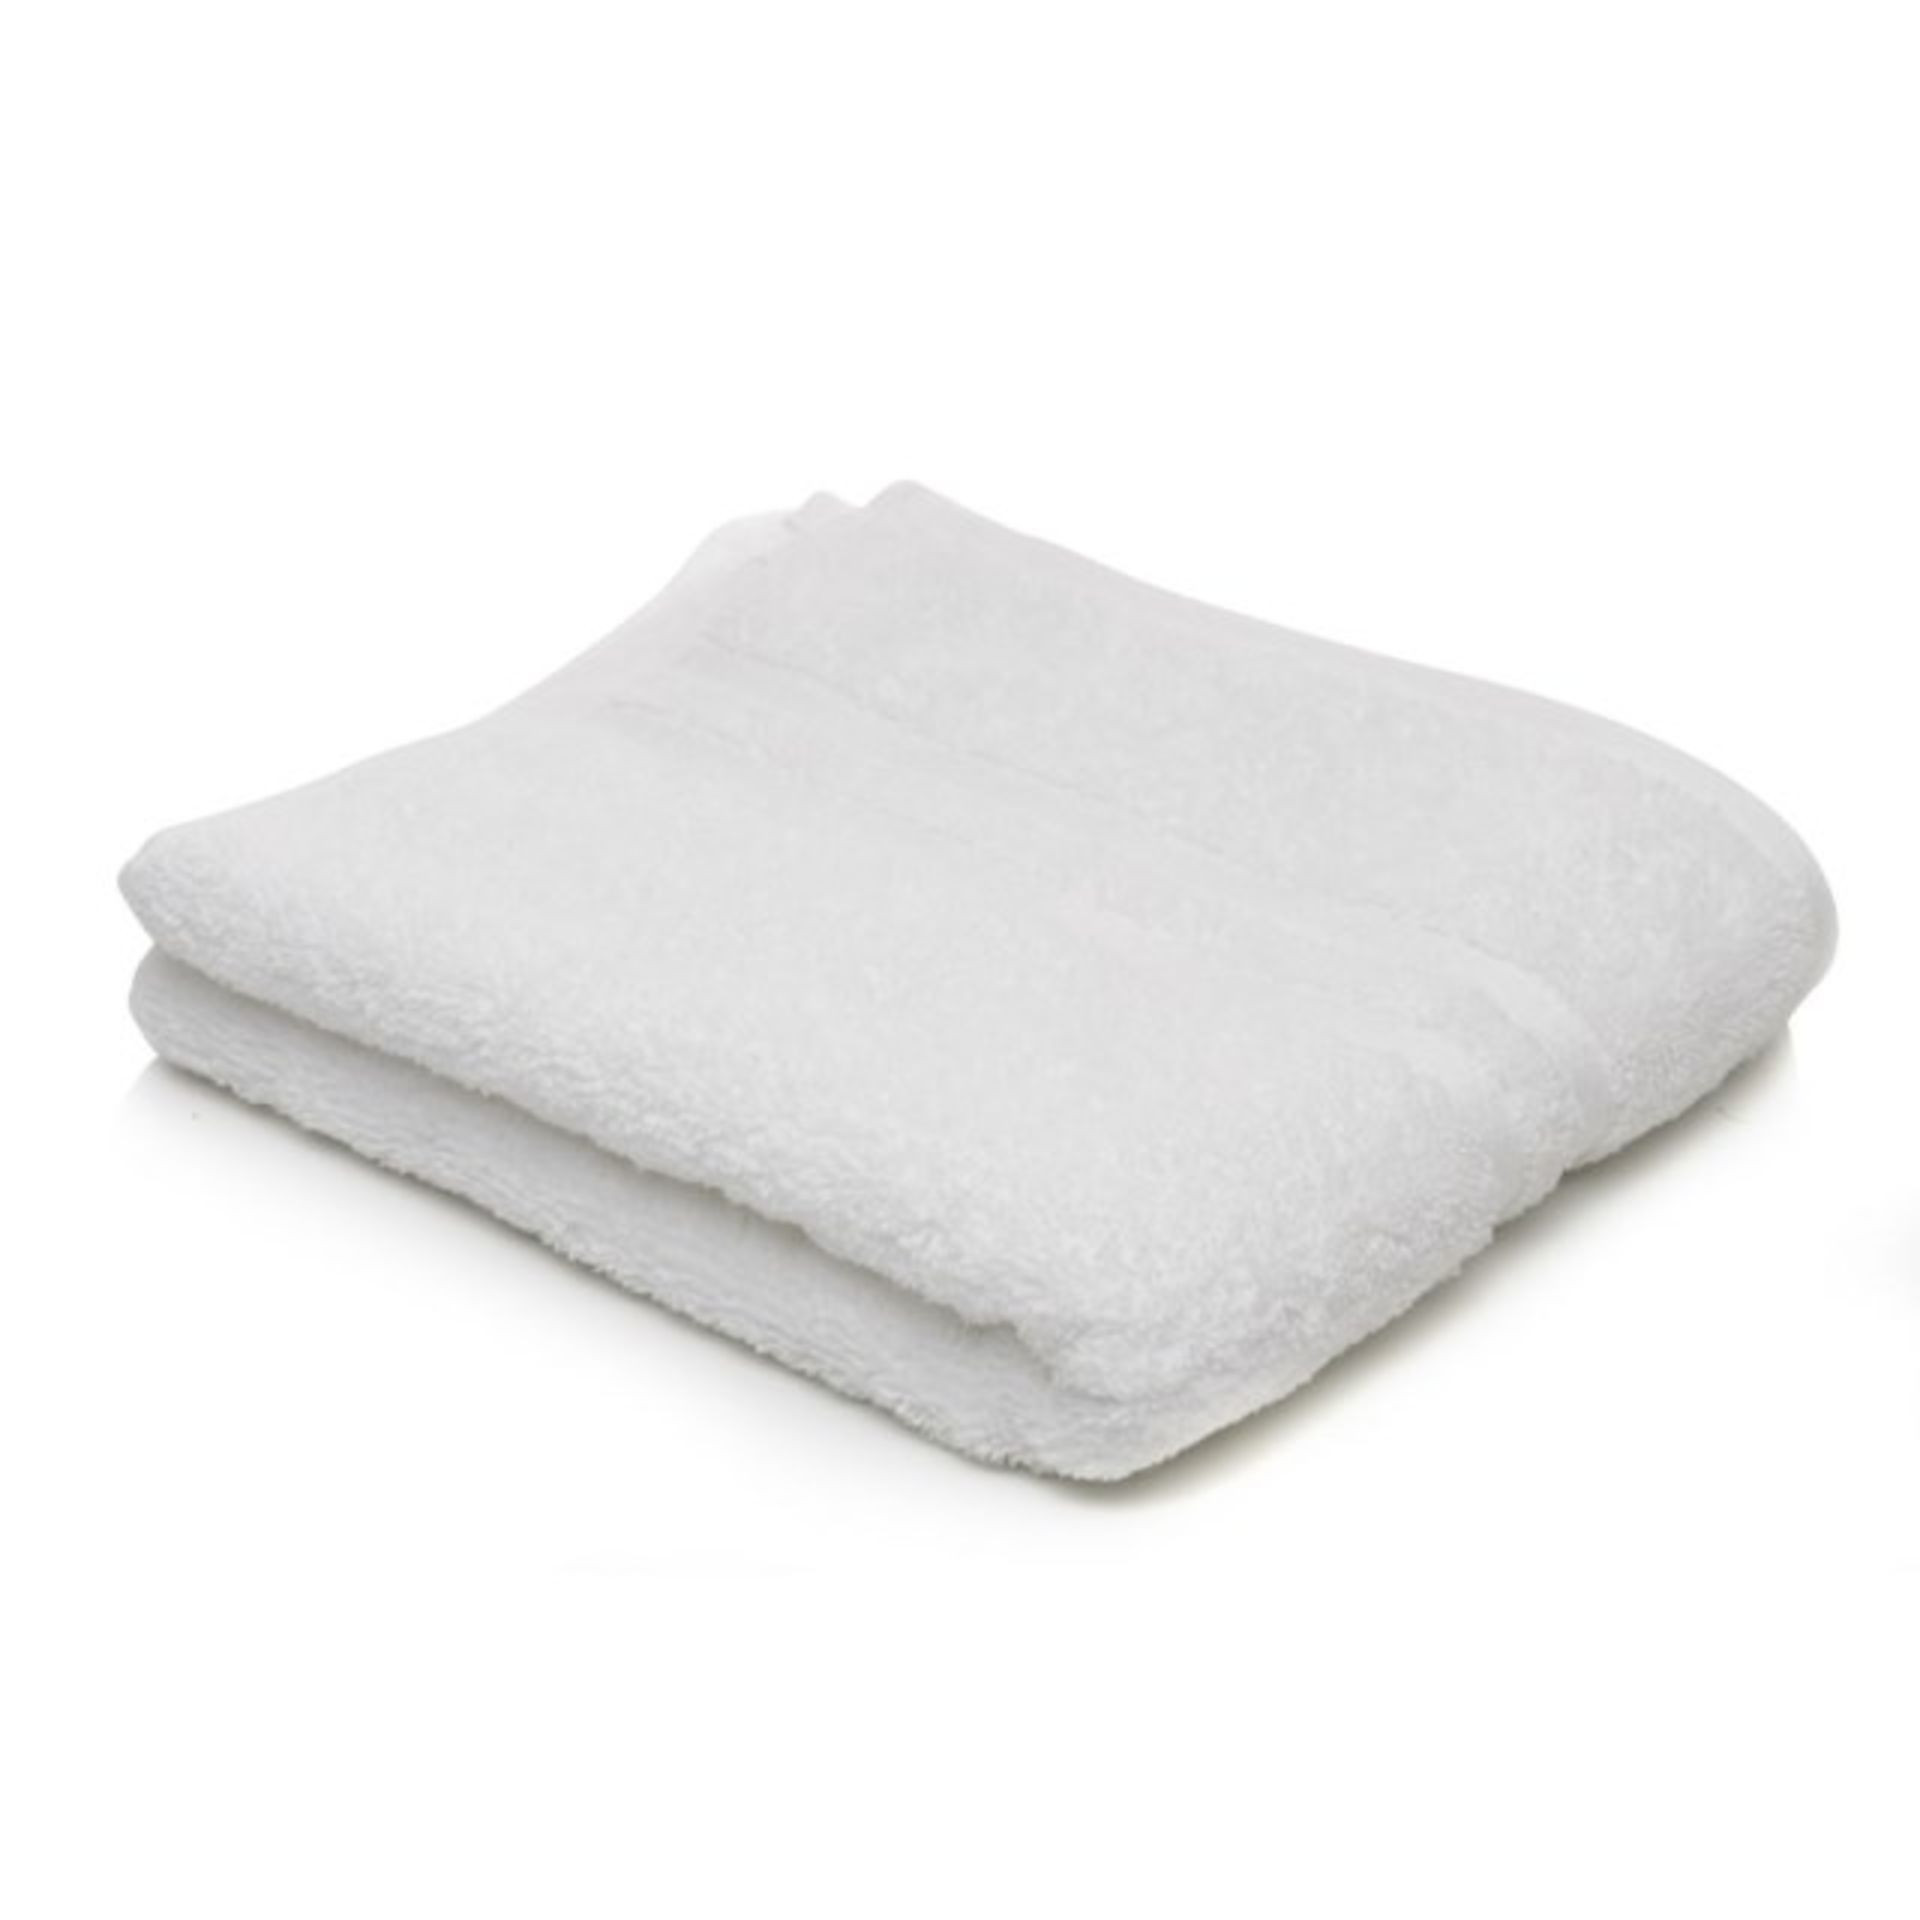 V *TRADE QTY* Brand New Hotel Quality Large Cotton Bath Sheet X 6 Bid price to be multiplied by Six